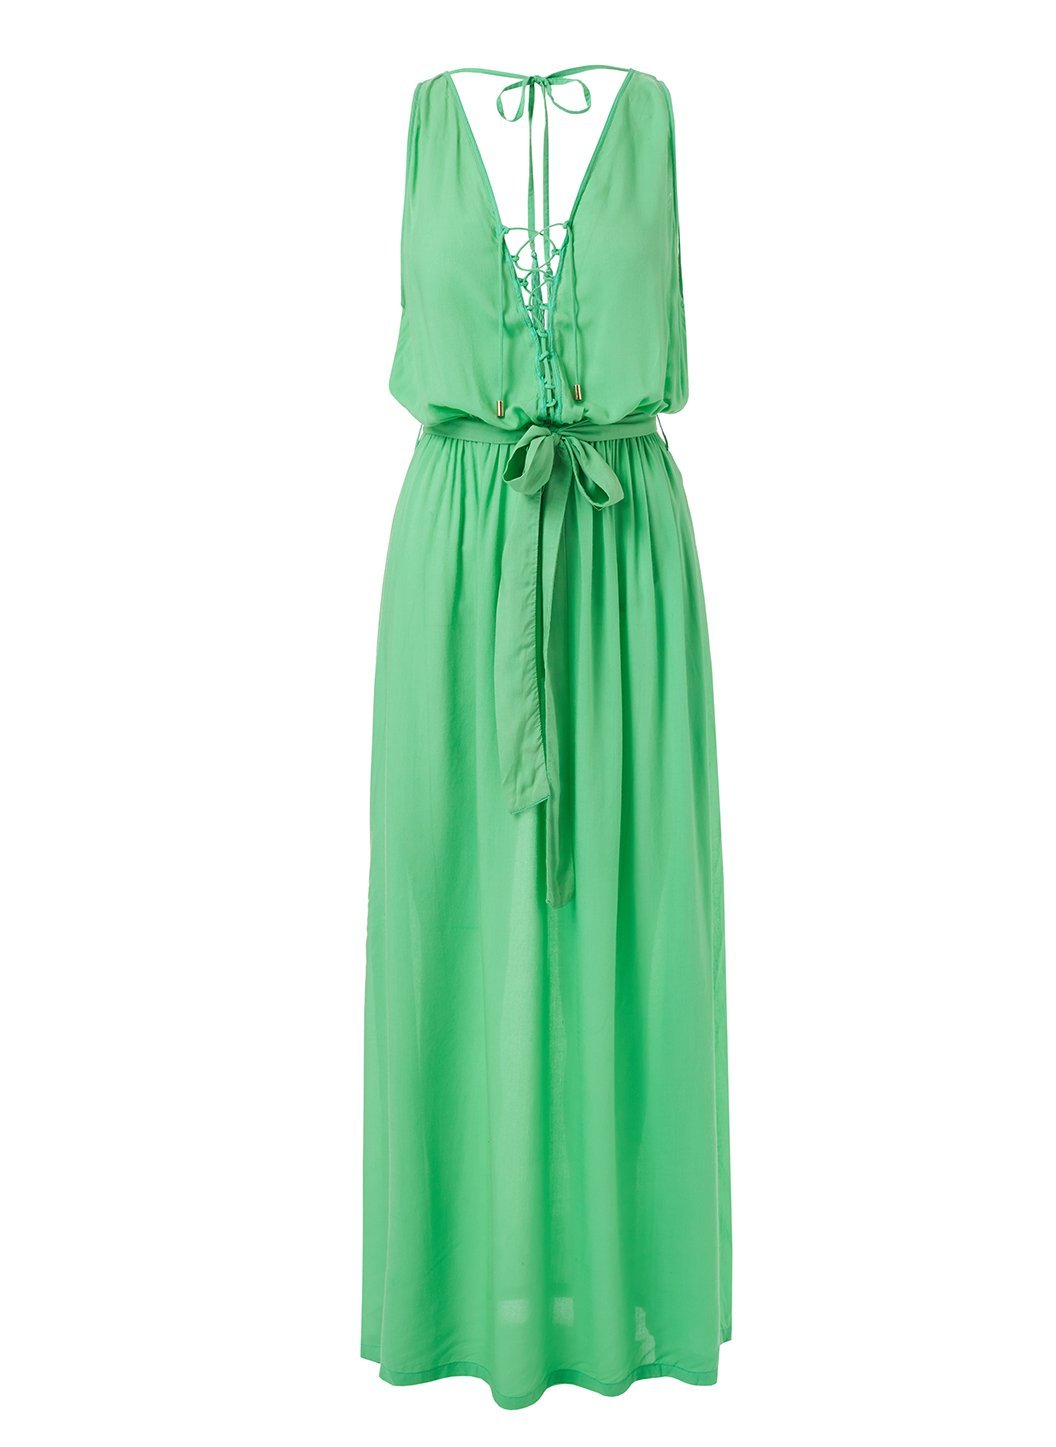 jacquie green laceup belted maxi dress 2019